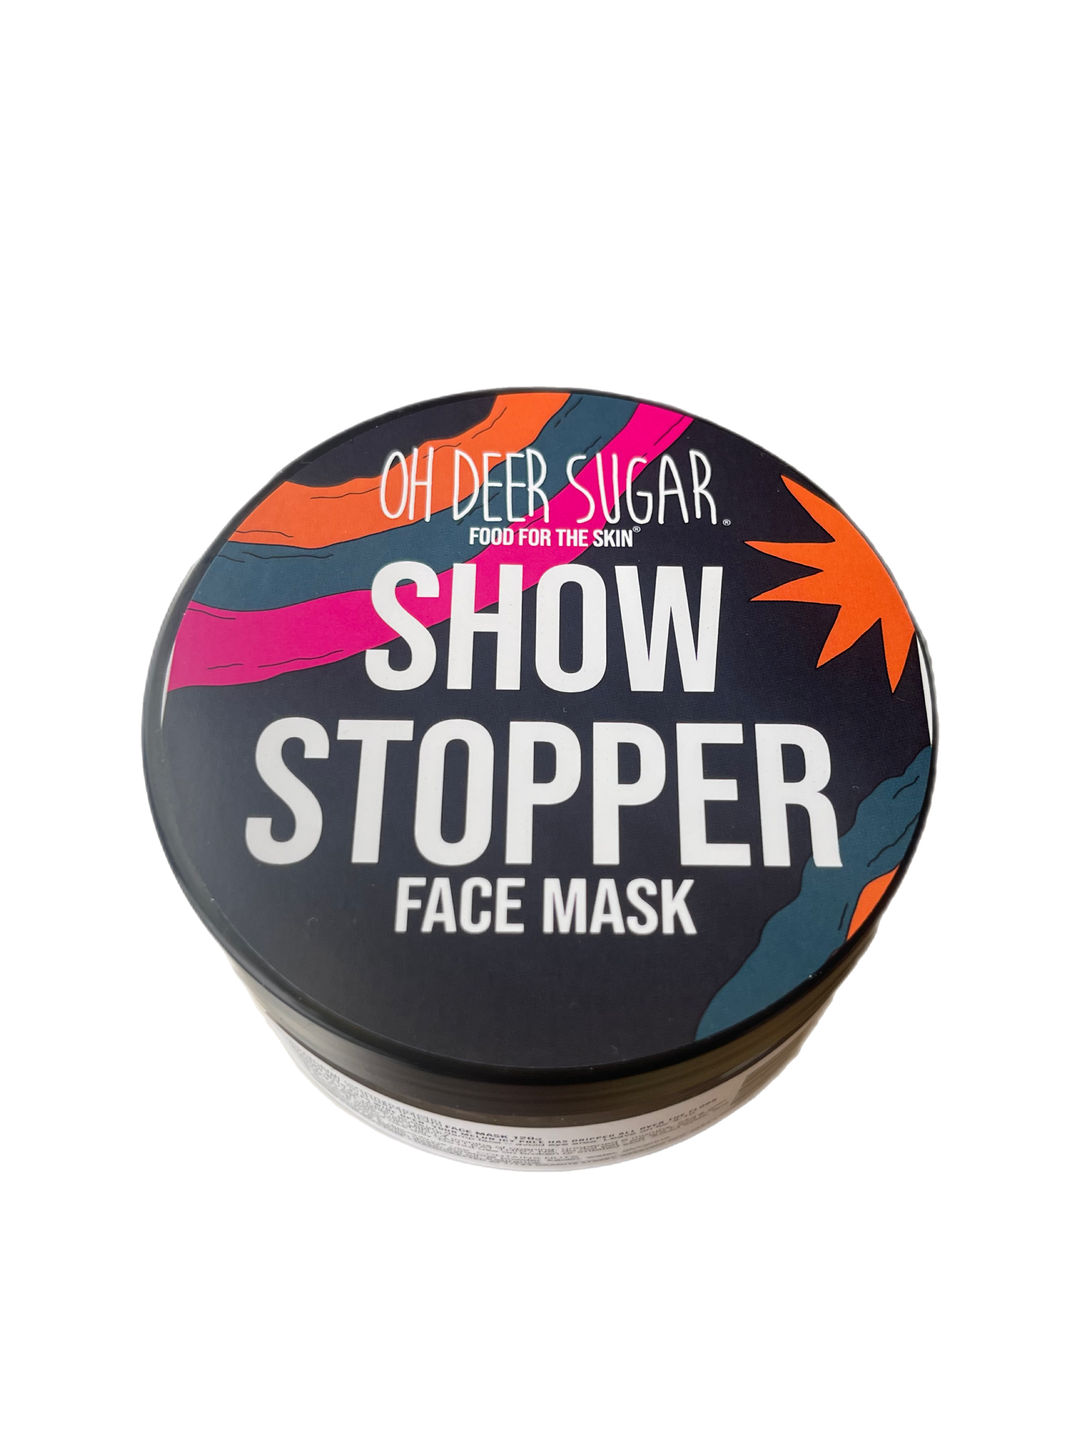 showstopper FACEMASK 120g